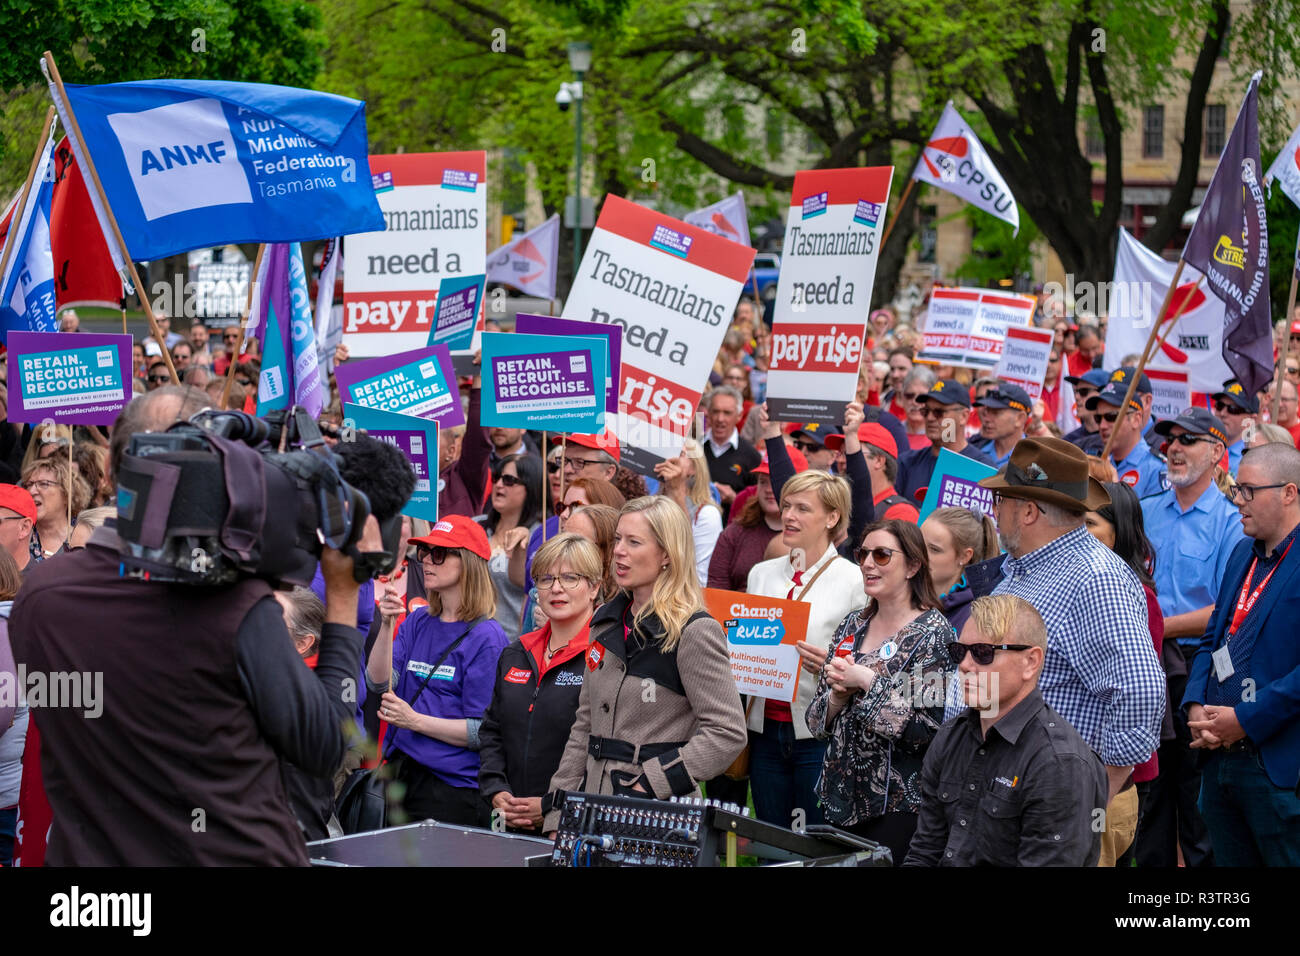 Public servants, teachers and health workers in Hobart Tasmania protesting outside Parliament demanding wage increases. Stock Photo